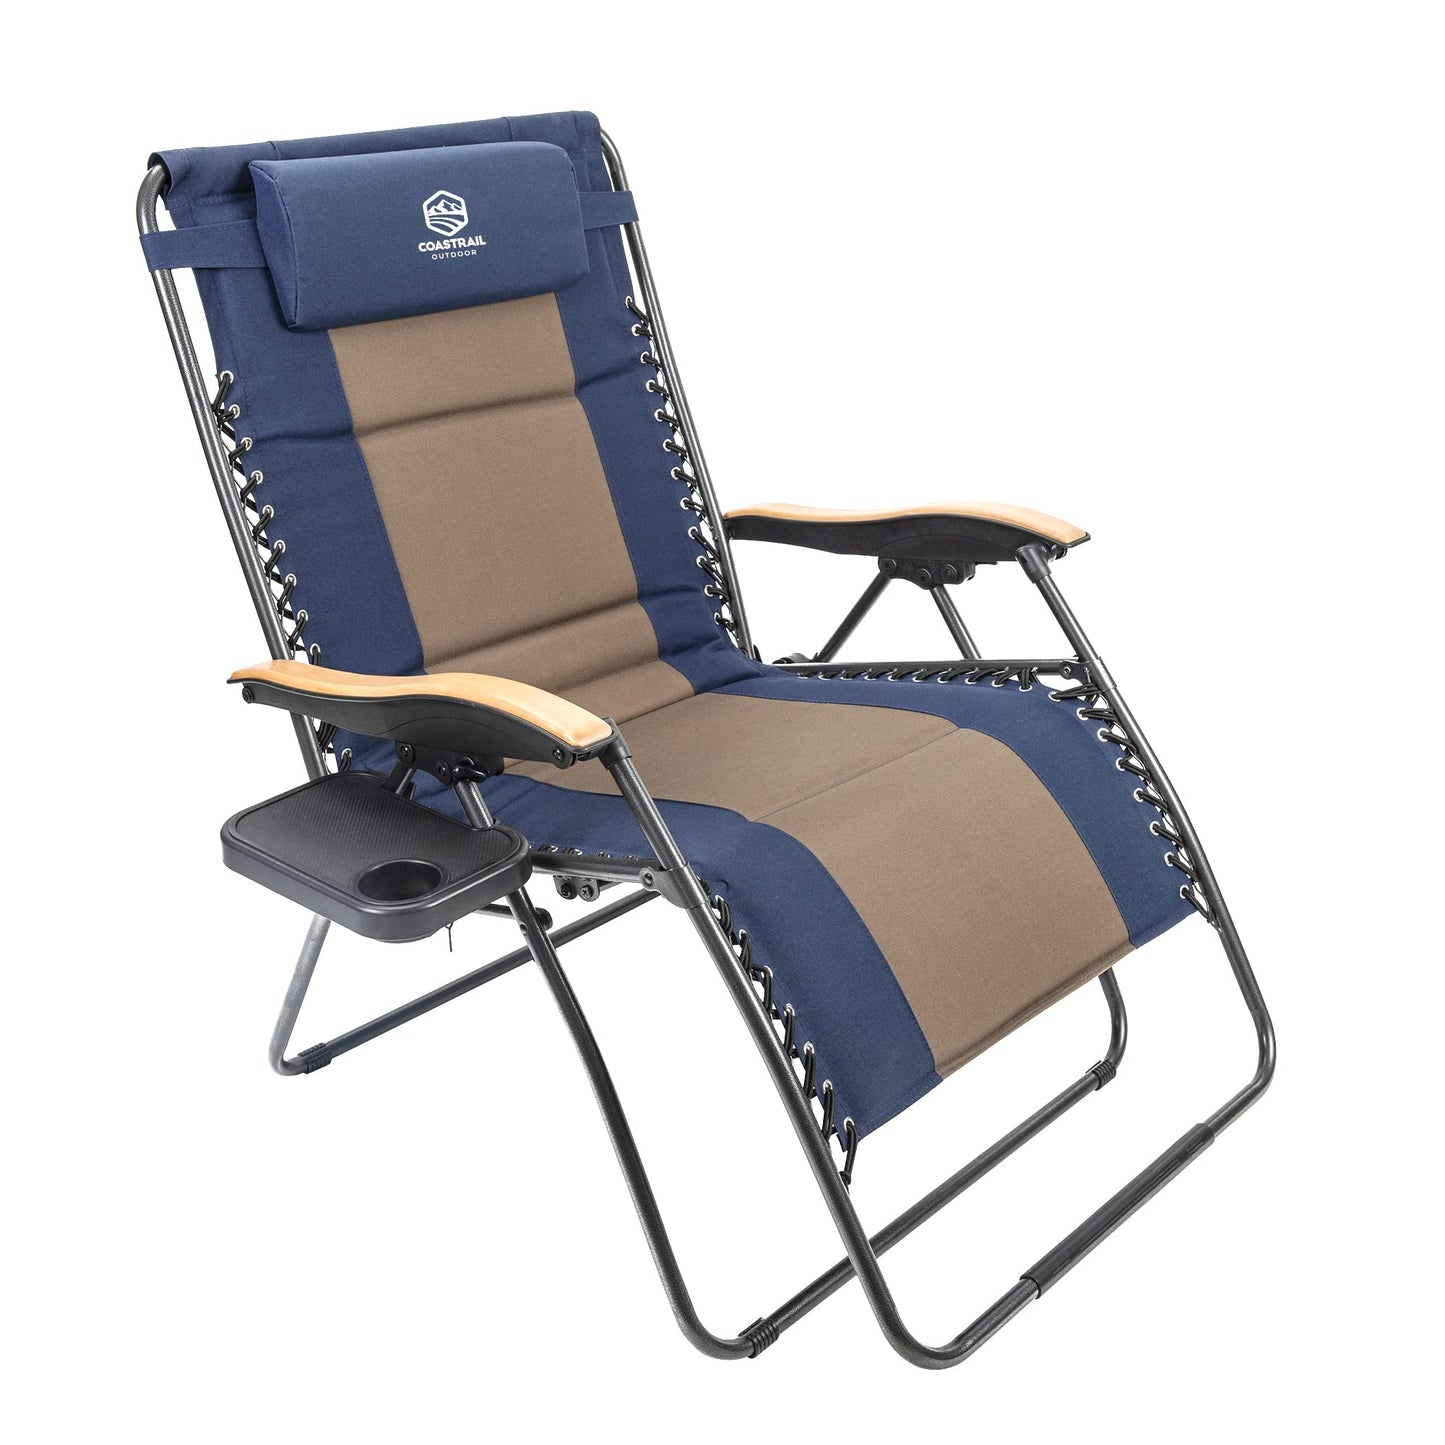 Coastrail Outdoor Zero Gravity Chair Wood Armrest XXL Camping Lounge Chair Patio Recliner Support 400lbs Padded Reclining Chair Folding Lawn Chair with Side Table Blue